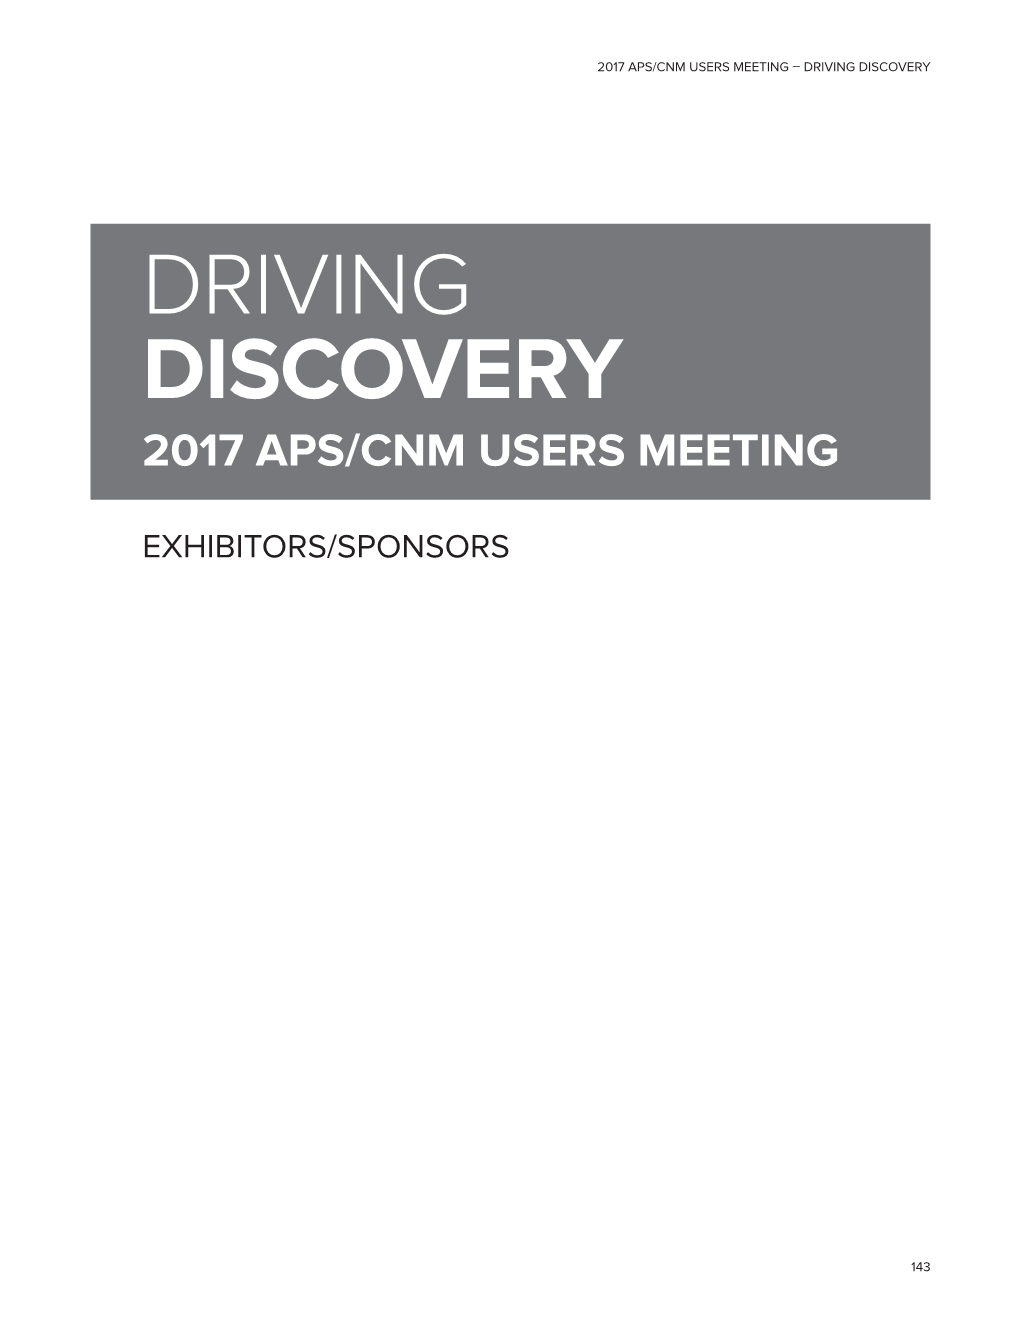 Driving Discovery